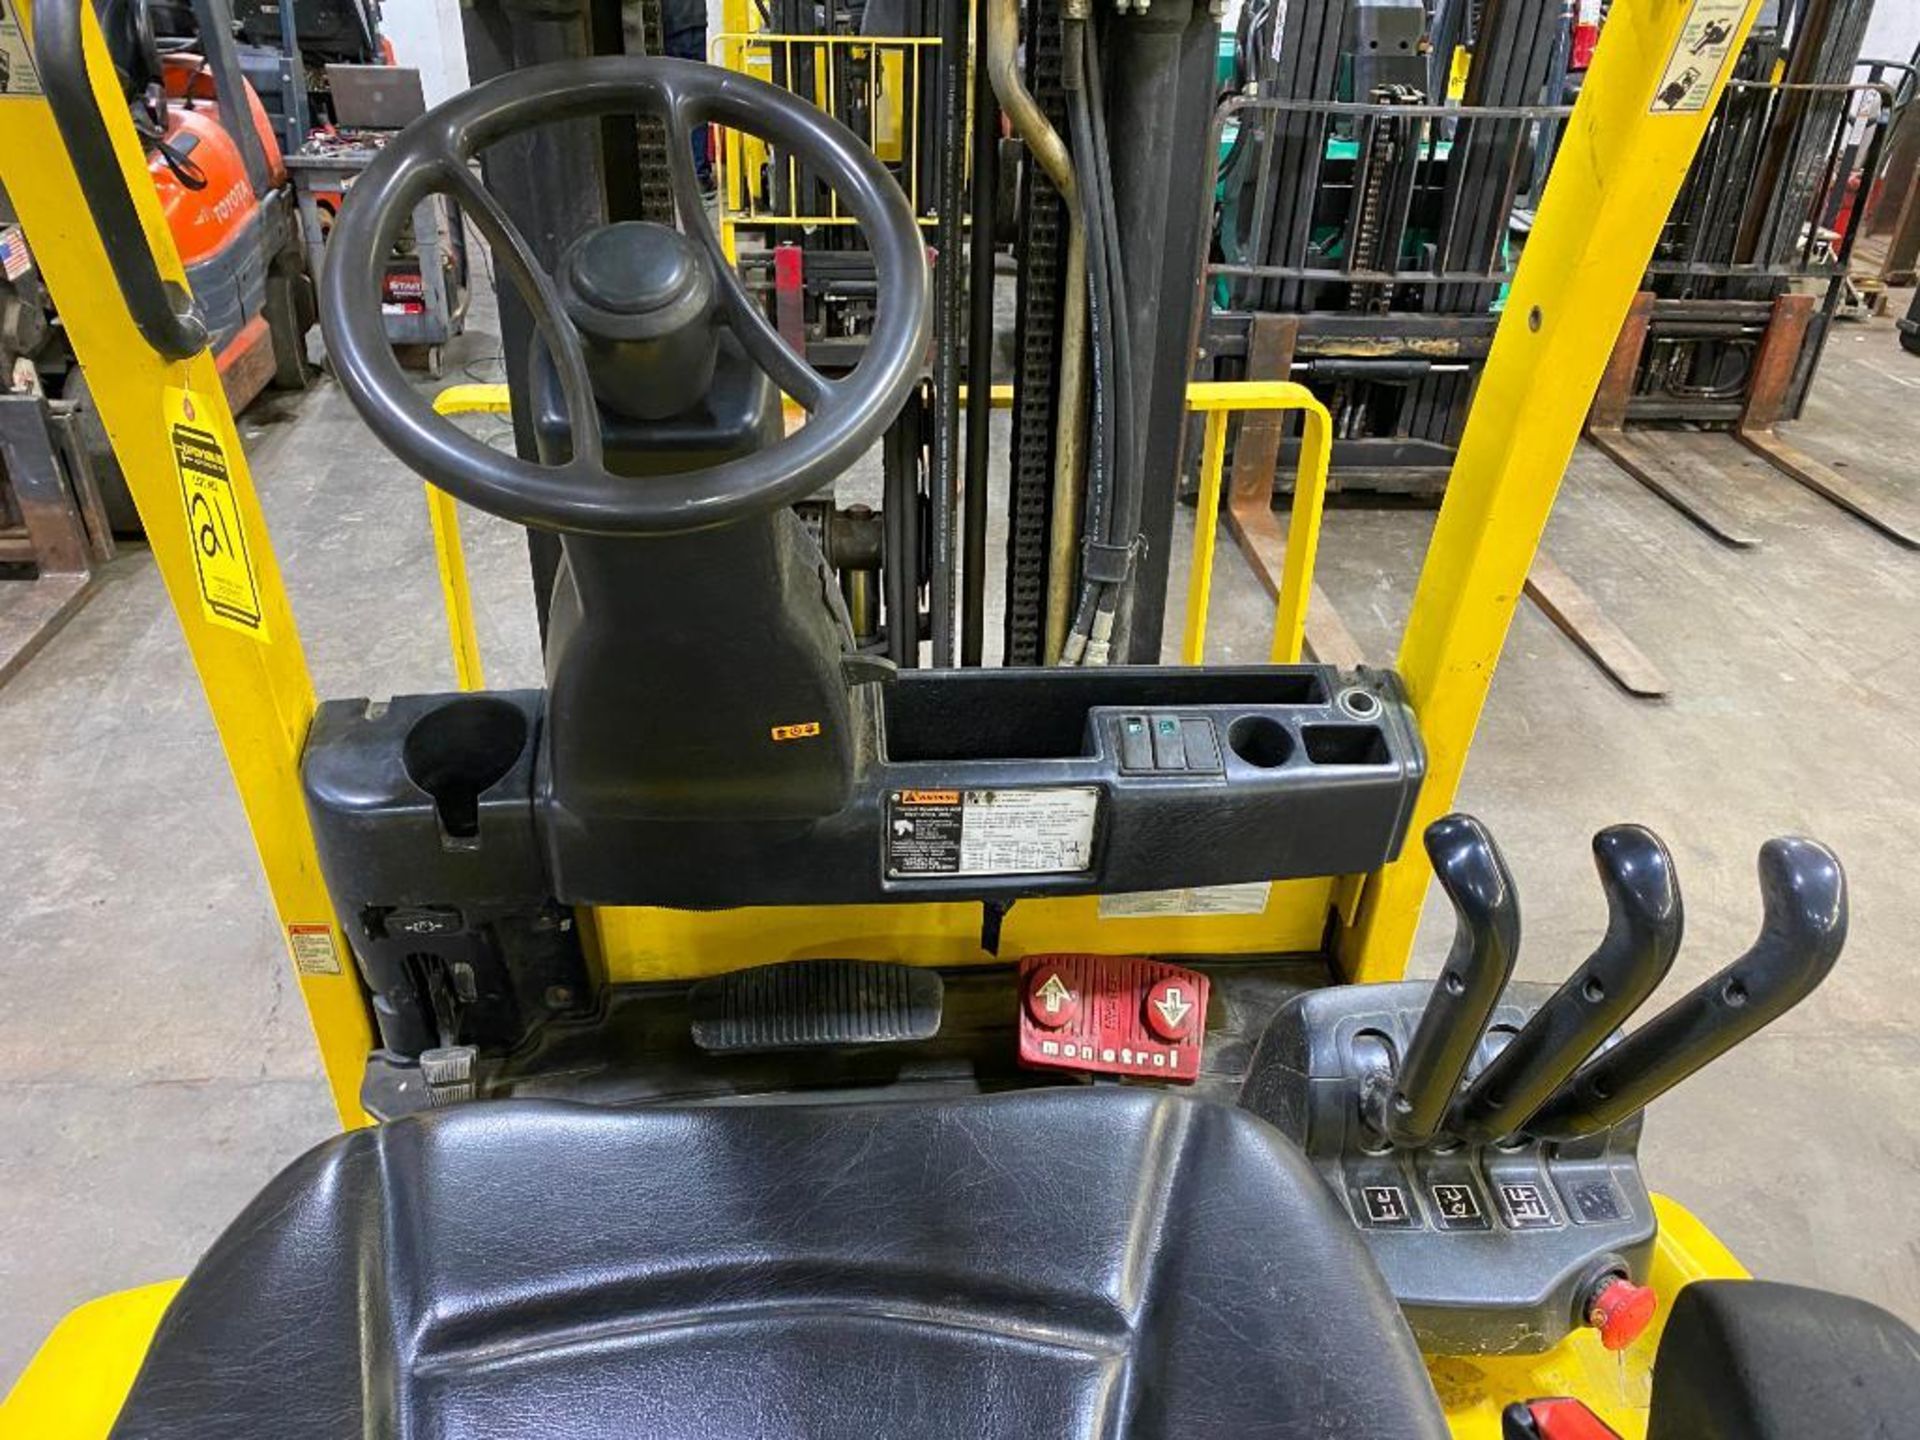 Hyster 5,500-LB. Capacity Forklift, Model E55XN-33, S/N A268N02370G, 48 Volt Battery, Cushion Tires, - Image 5 of 5